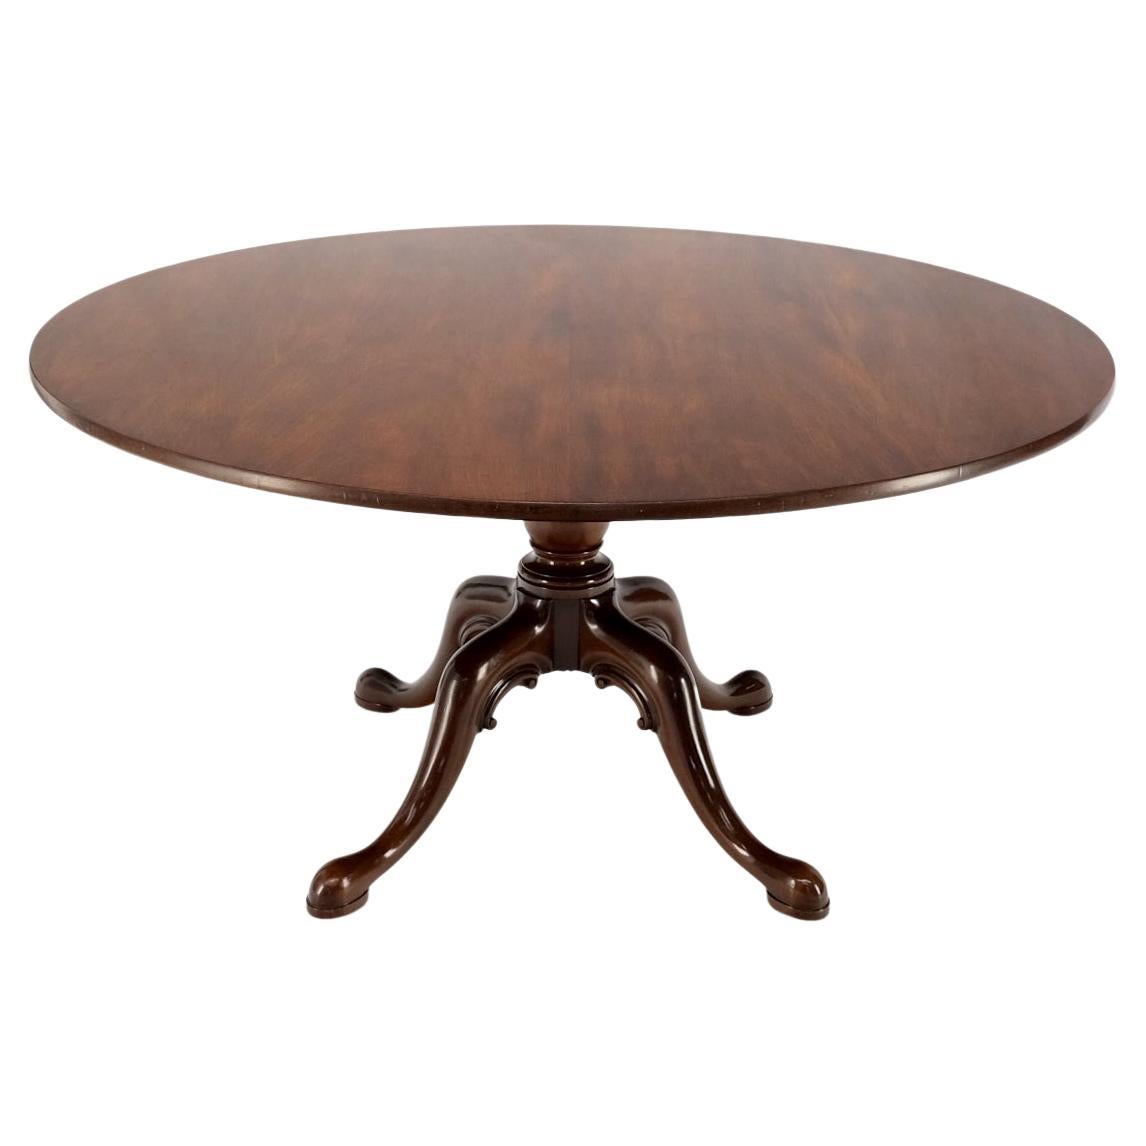 Large Round Solid Mahogany Dining Breakfast Table Removable Top